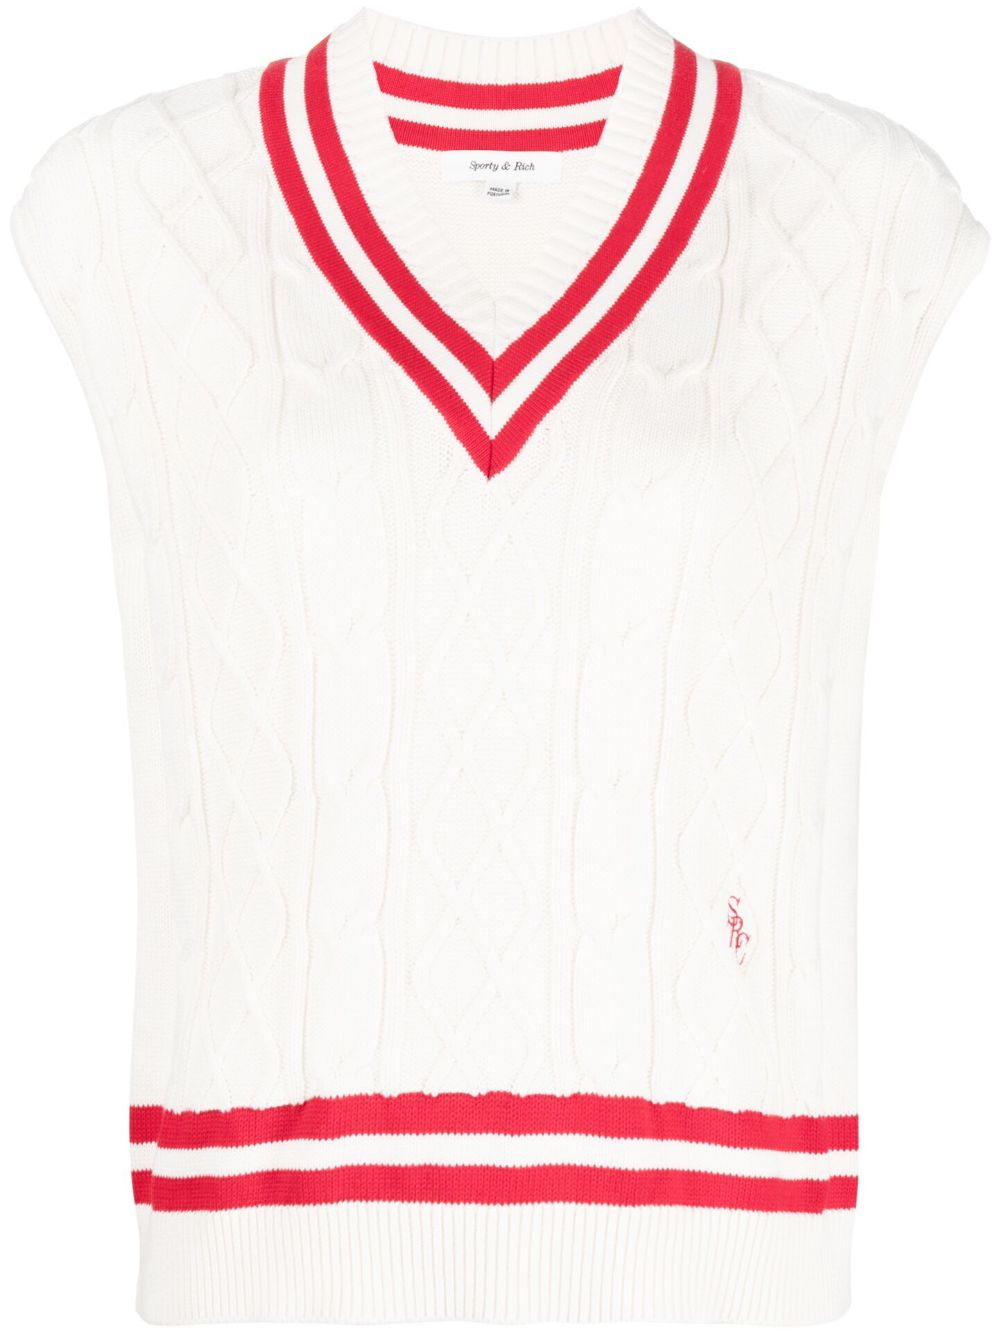 Sporty & Rich striped-edges sleeveless knitted top - White von Sporty & Rich